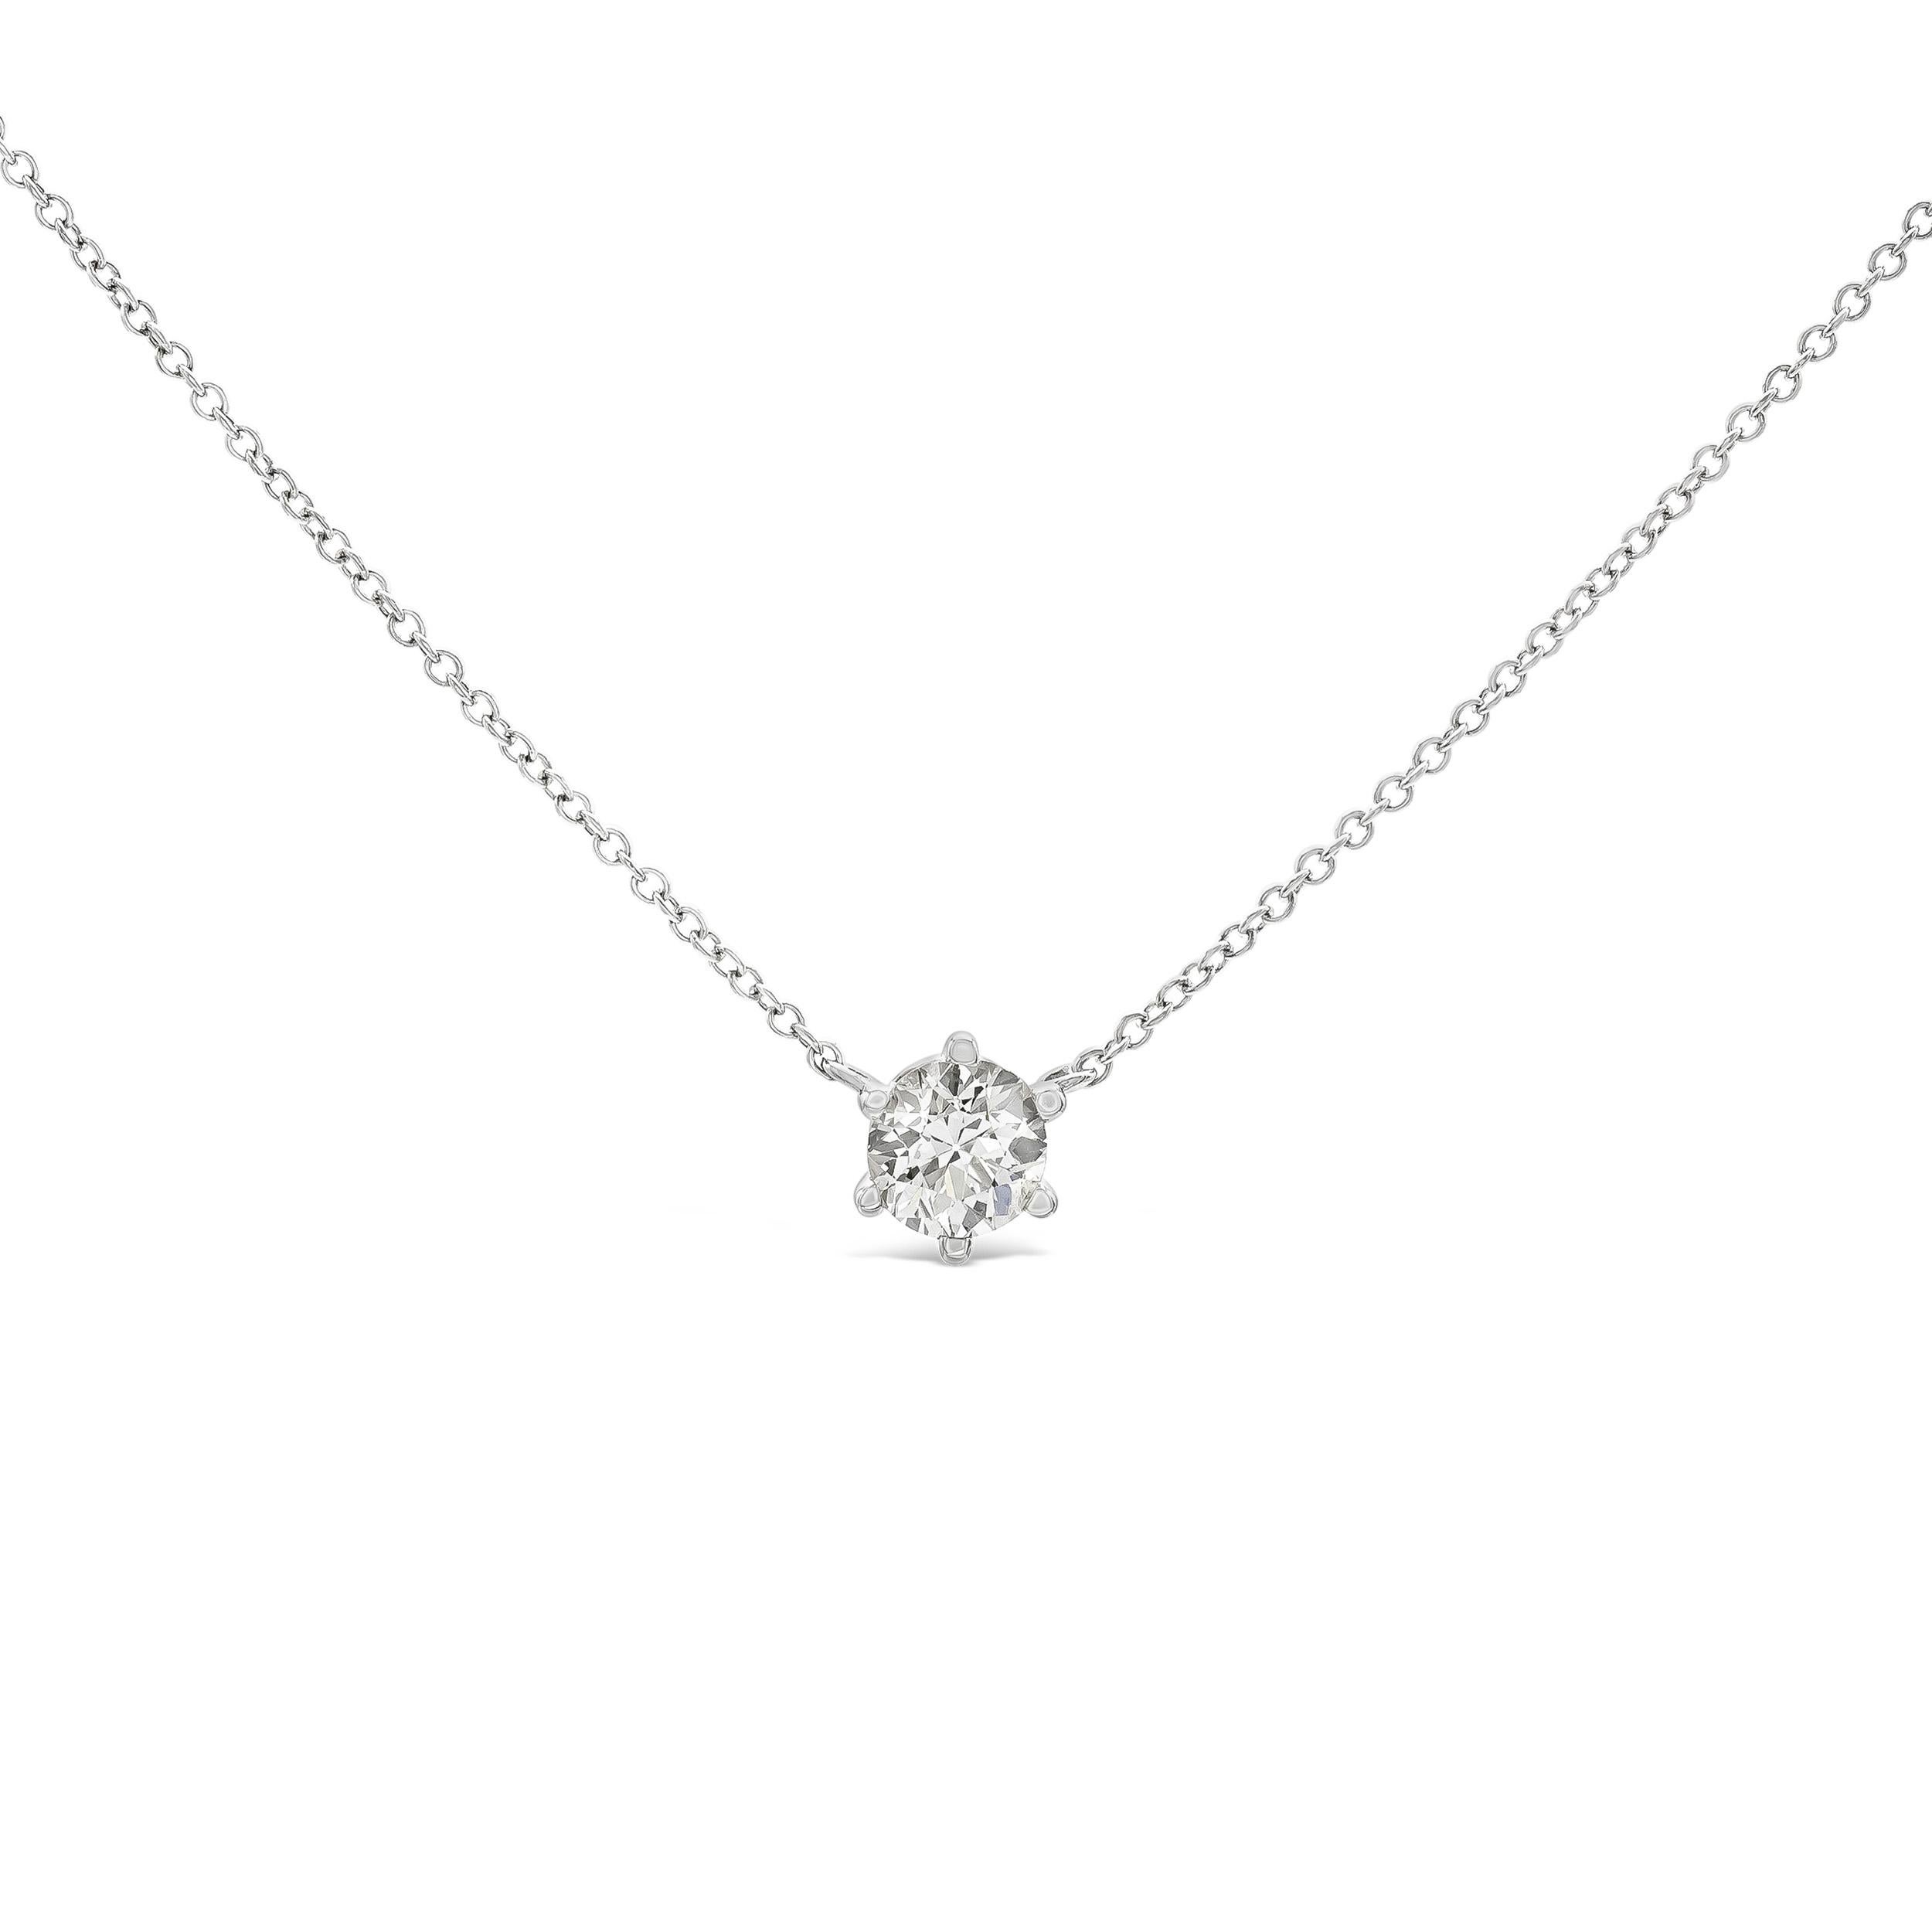 Add some shine to your wardrobe with our signature pendant style. A classically proportioned old Euro, weighing 0.61 ct, sparkles at the end of a delicate chain. Wear this piece alone or add it to your daily stack, she'll fit right in.  

Diamond